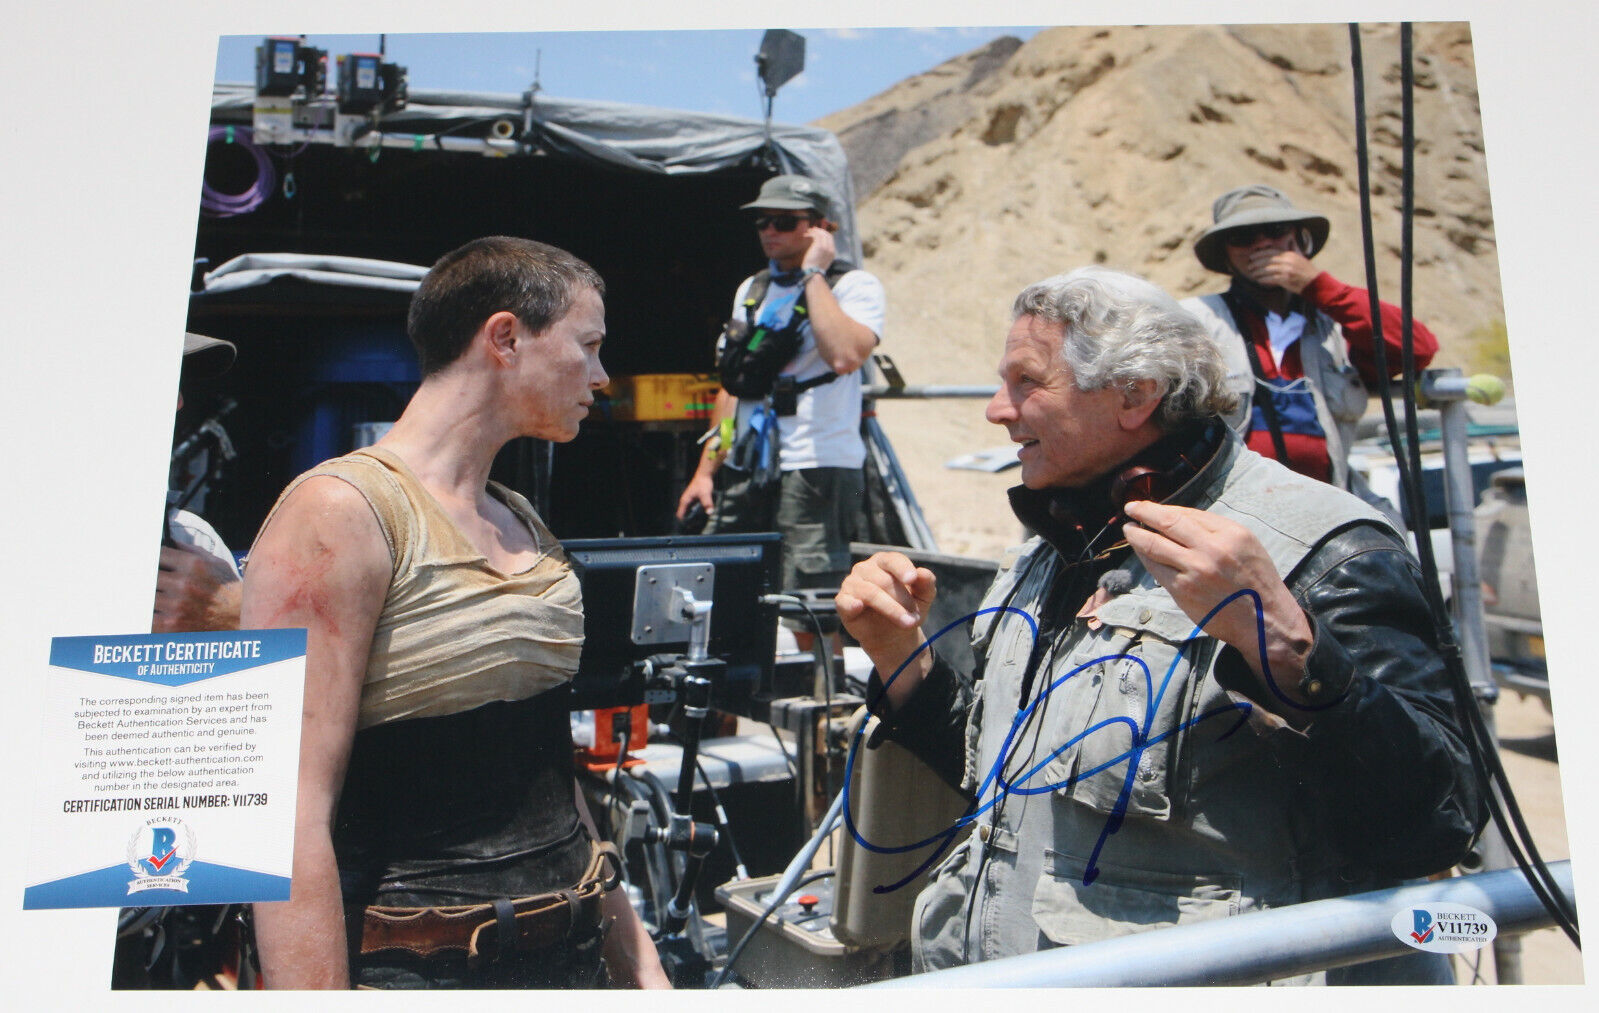 DIRECTOR GEORGE MILLER MAD MAX: FURY ROAD SIGNED 11X14 Photo Poster painting BECKETT COA BAS